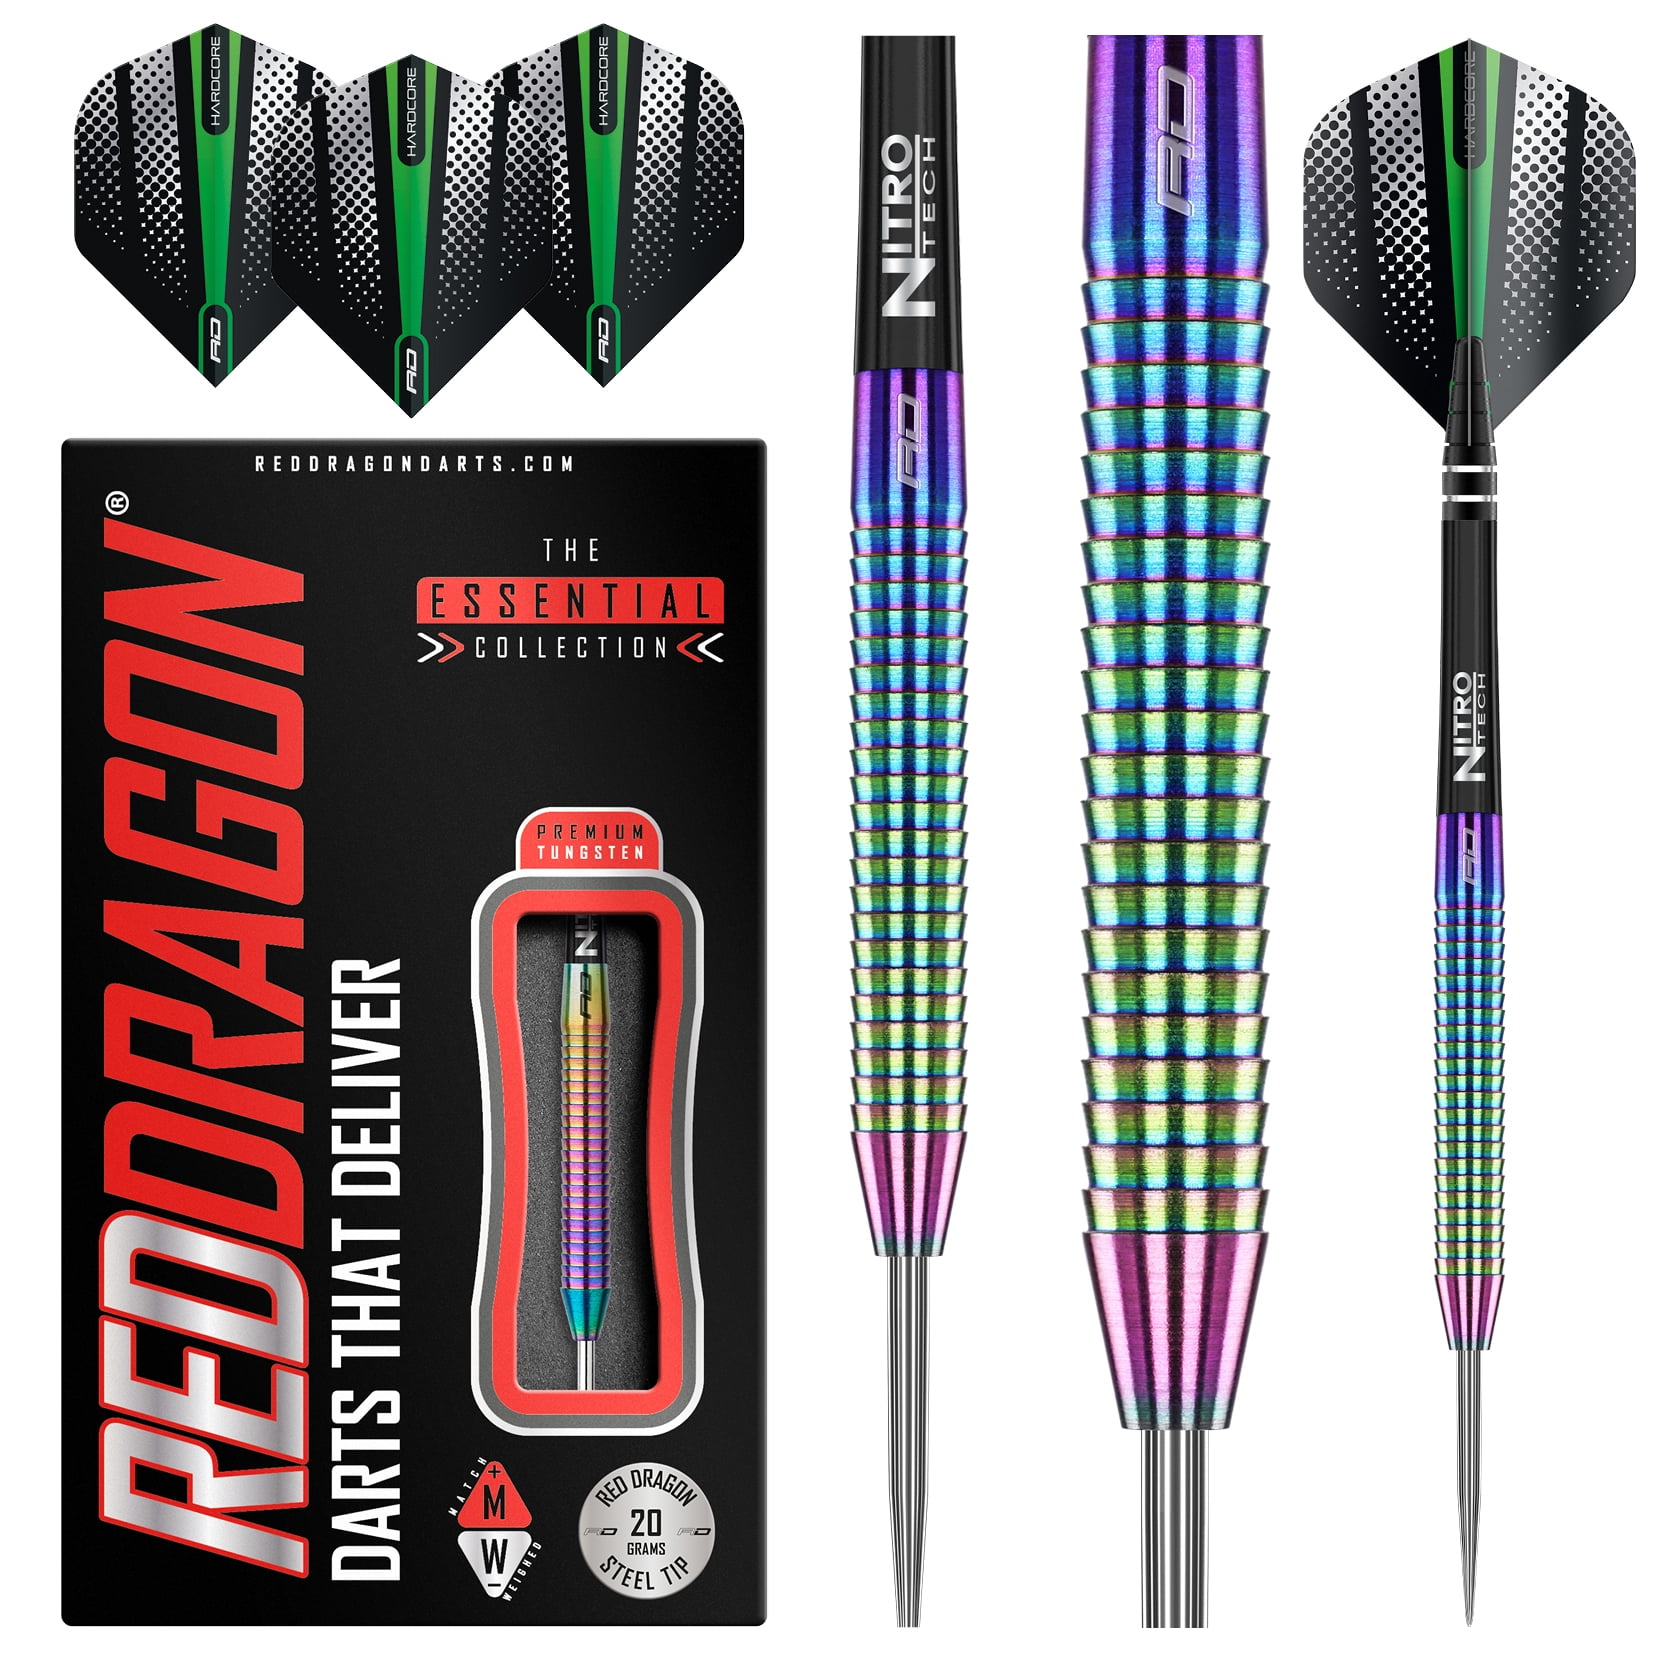 Stems and Point Protector Darts Gift 20g 22g 24g 20 Piece Dart Set With Flights 